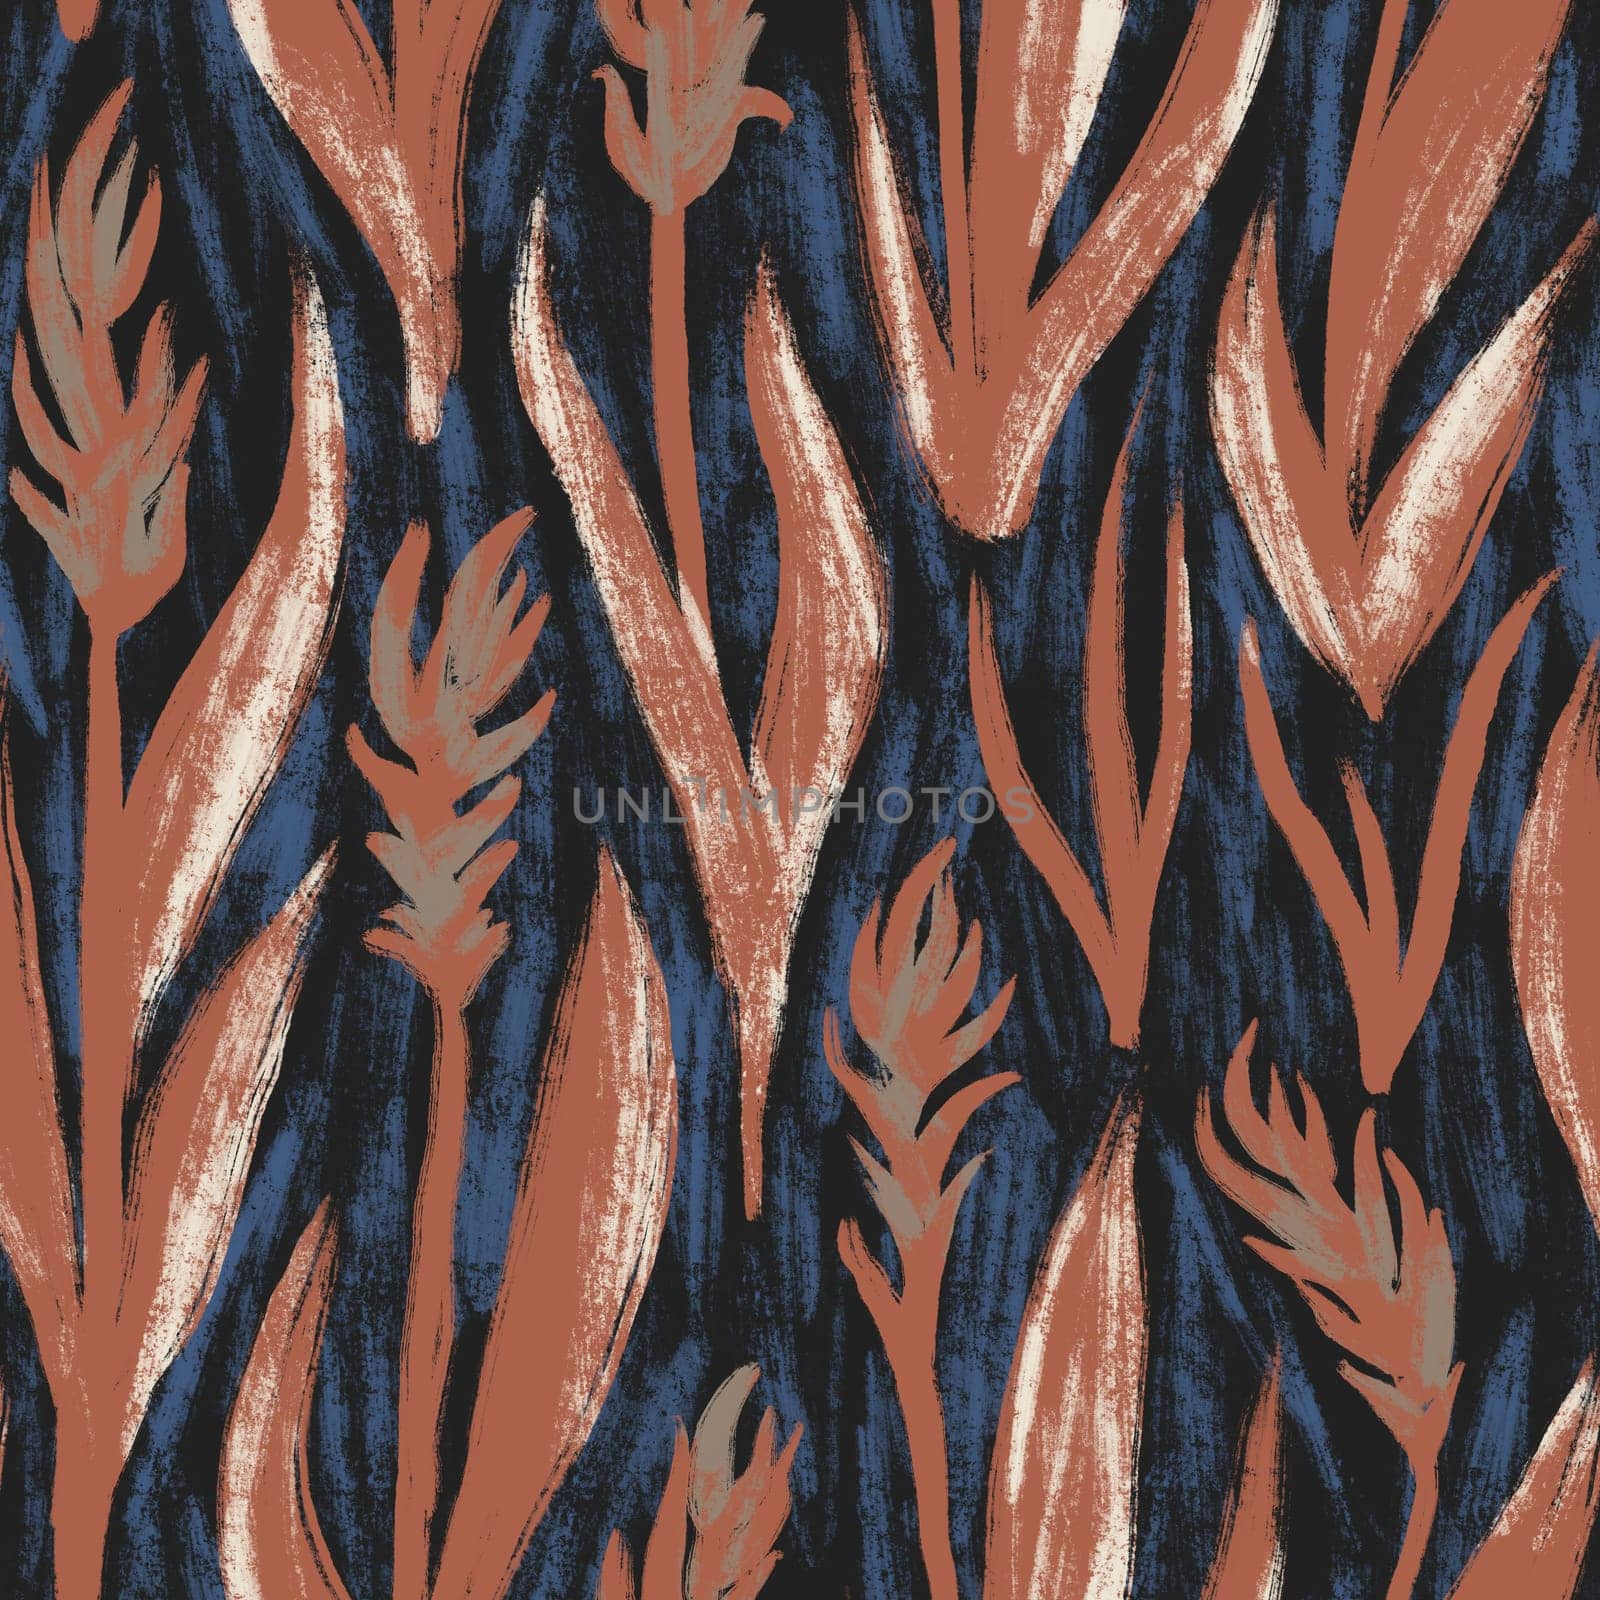 Hand drawn seamless pattern with brown beige grass leaves plants on dark blue black background. Fall autumn nature botanical print, moody neutral faded design, forest herbs wood woodland art